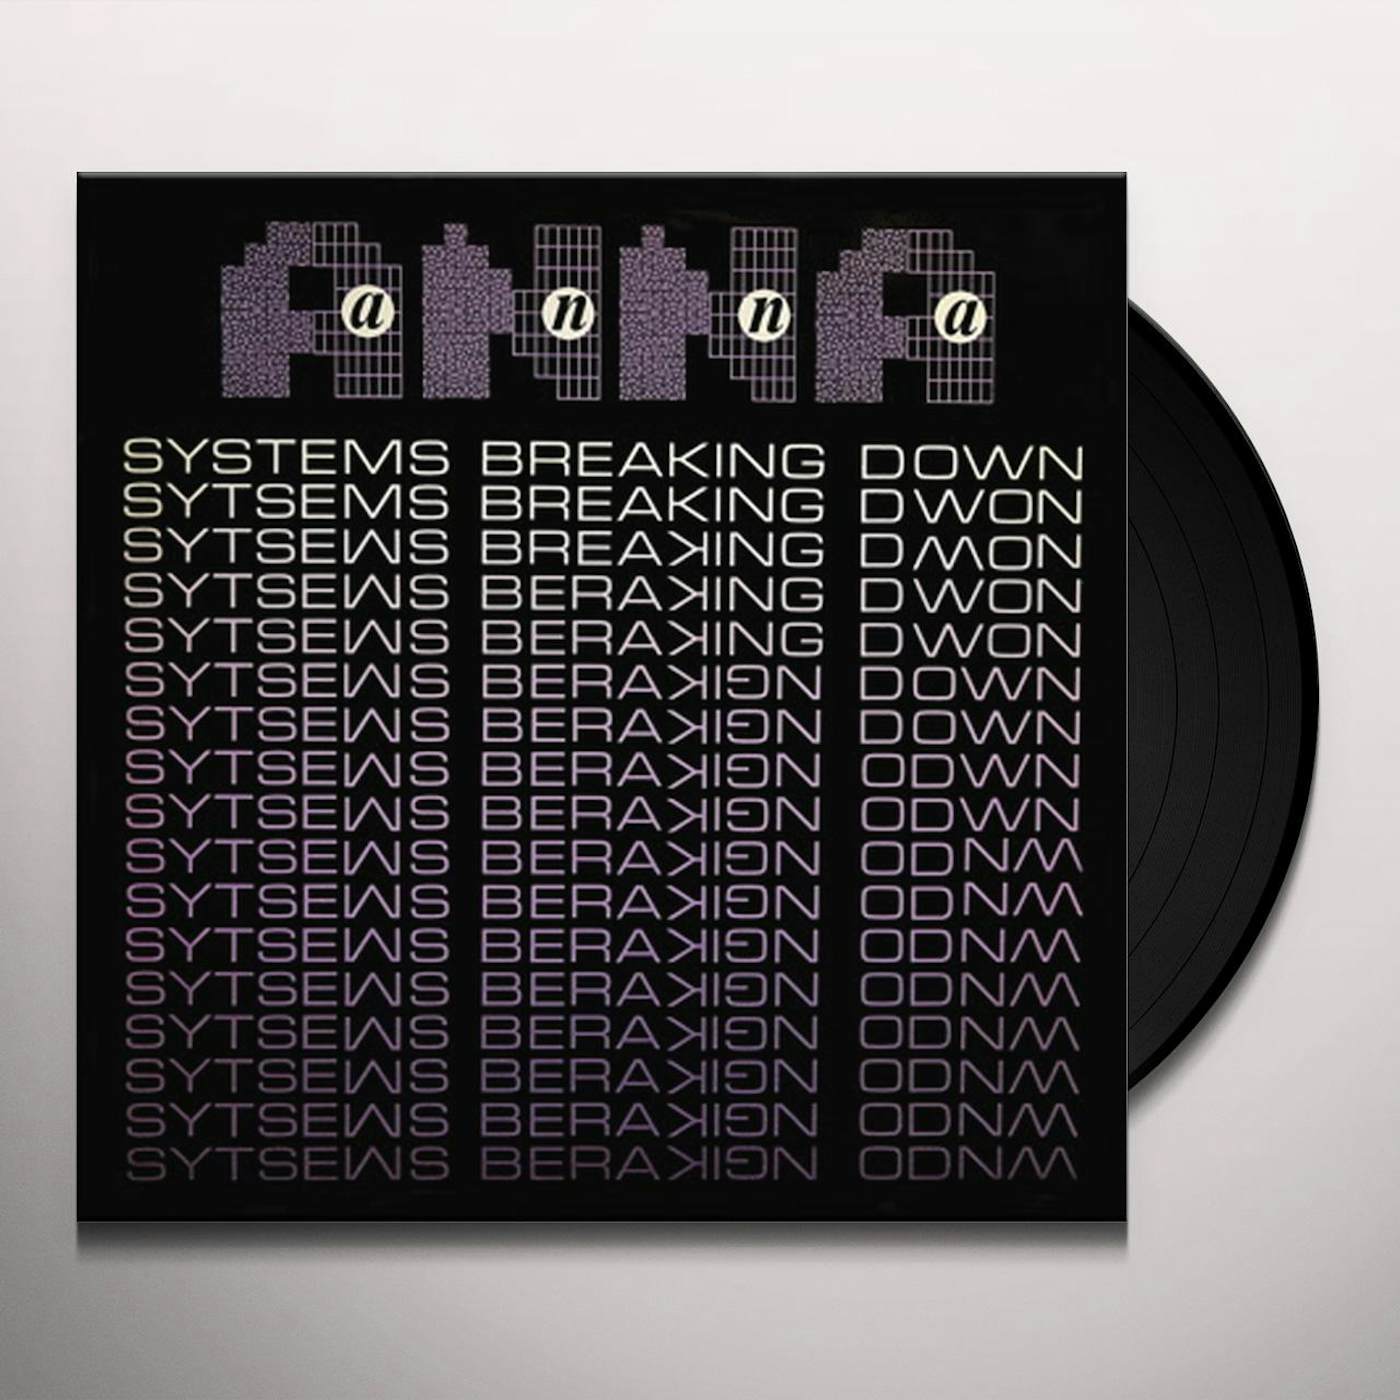 Anna Systems Breaking Down Vinyl Record